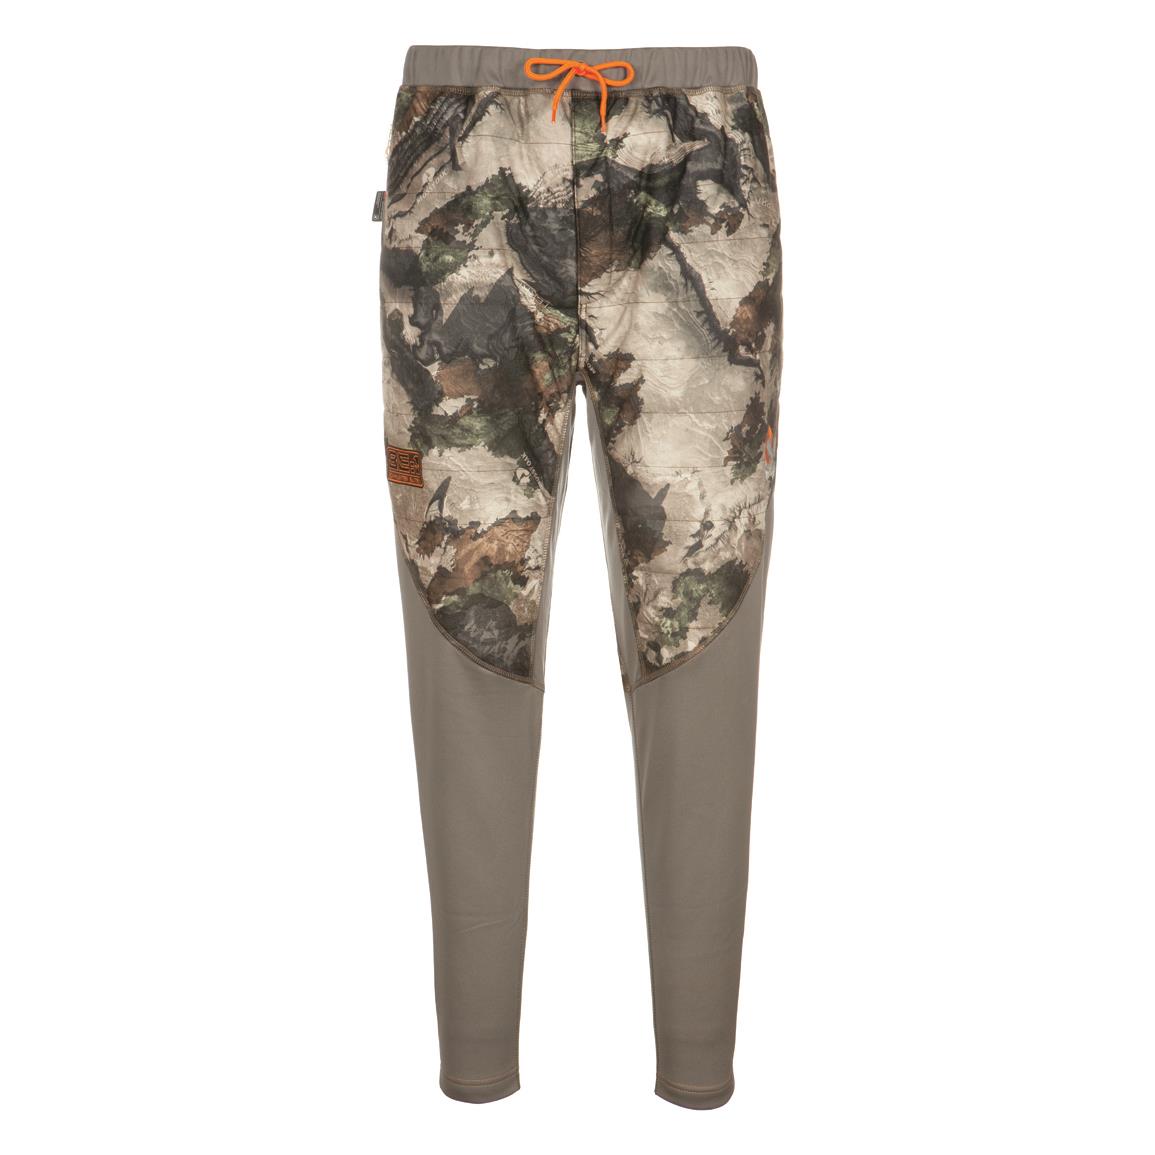 NOMAD Men's Stretch-Lite Hunting Pants - 719539, Camo Pants at ...